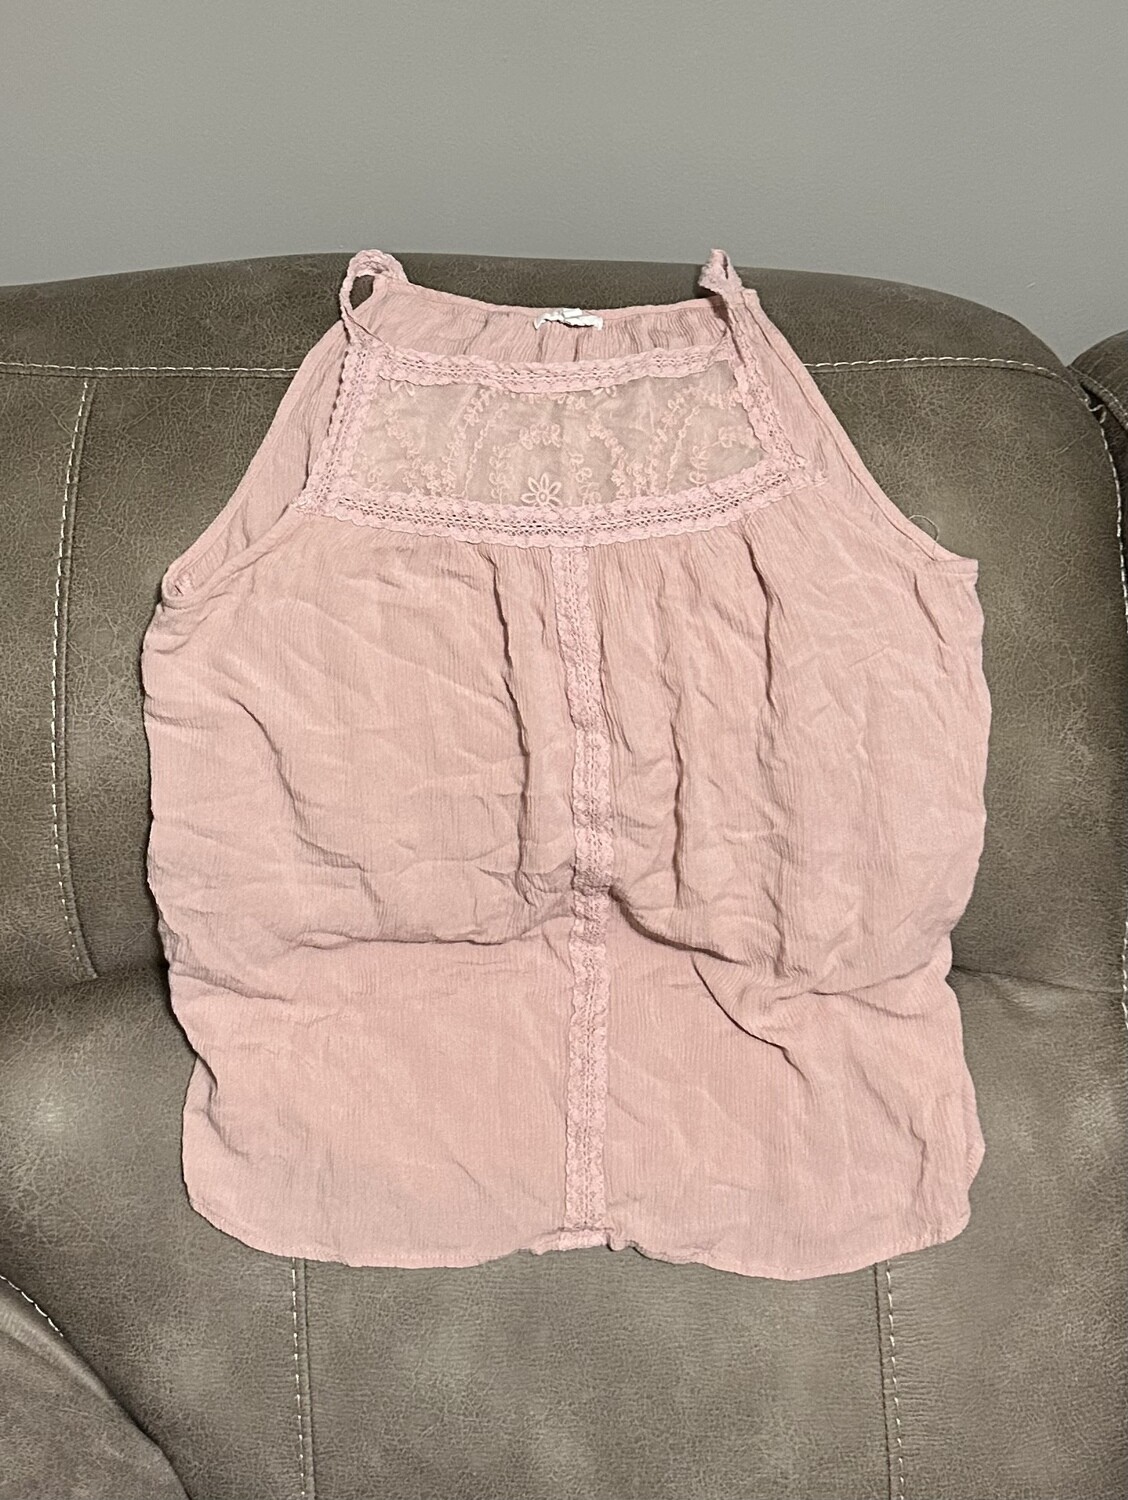 Maurices pink lace tank